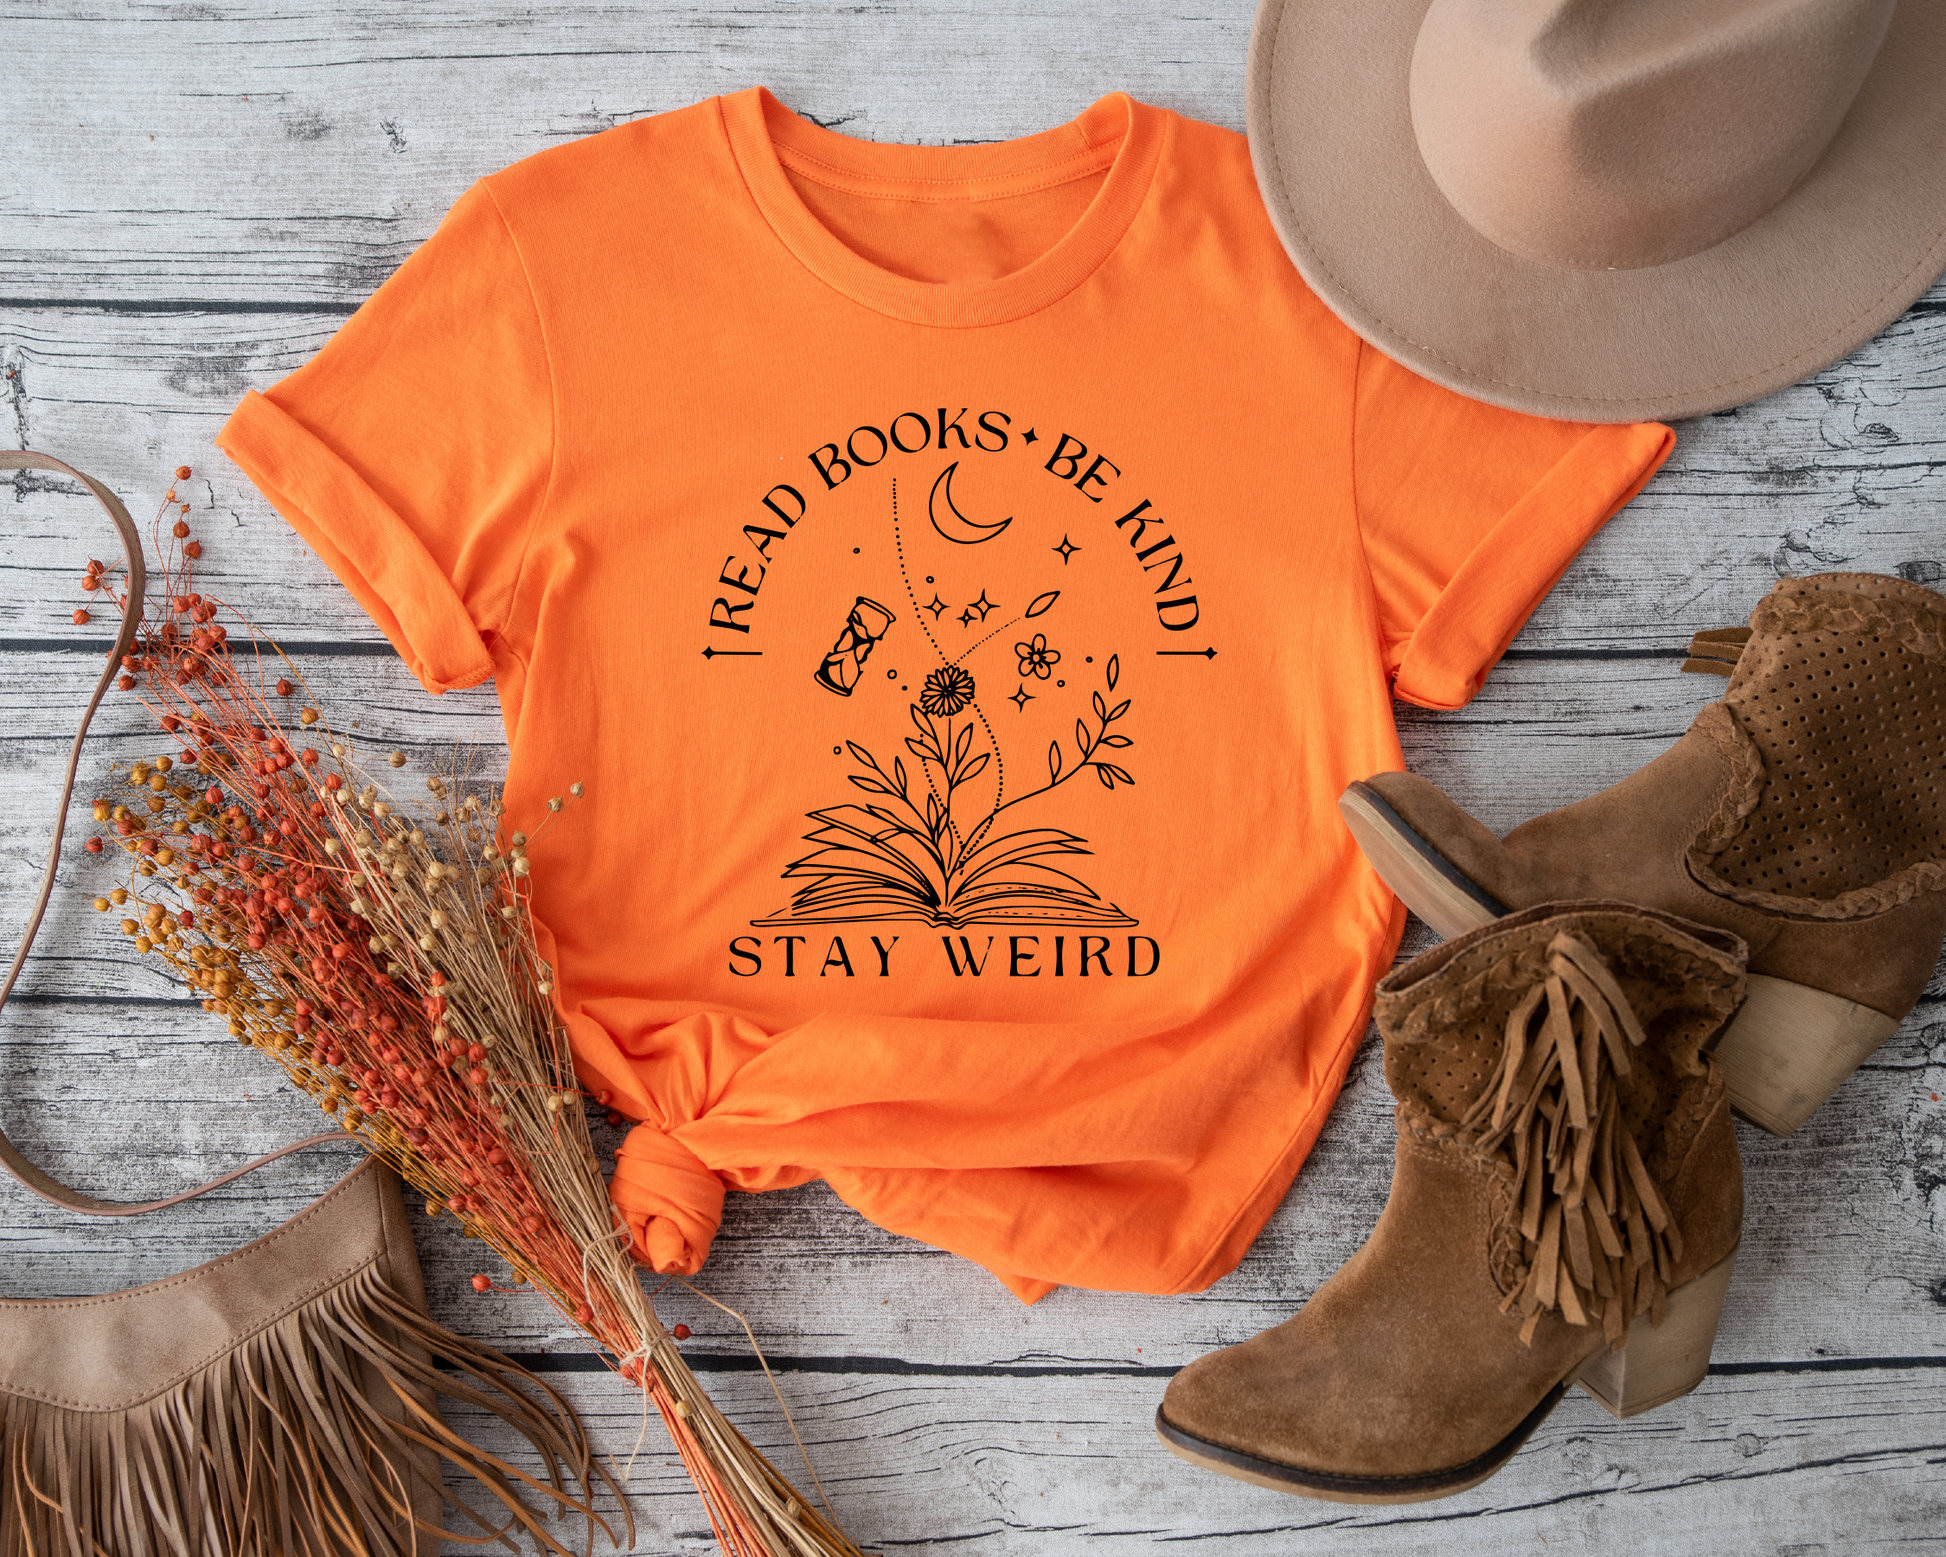 Embrace the power of reading, kindness, and individuality with the inspiring "Read Books Be Kind Stay Weird Shirt, Teacher Shirt"